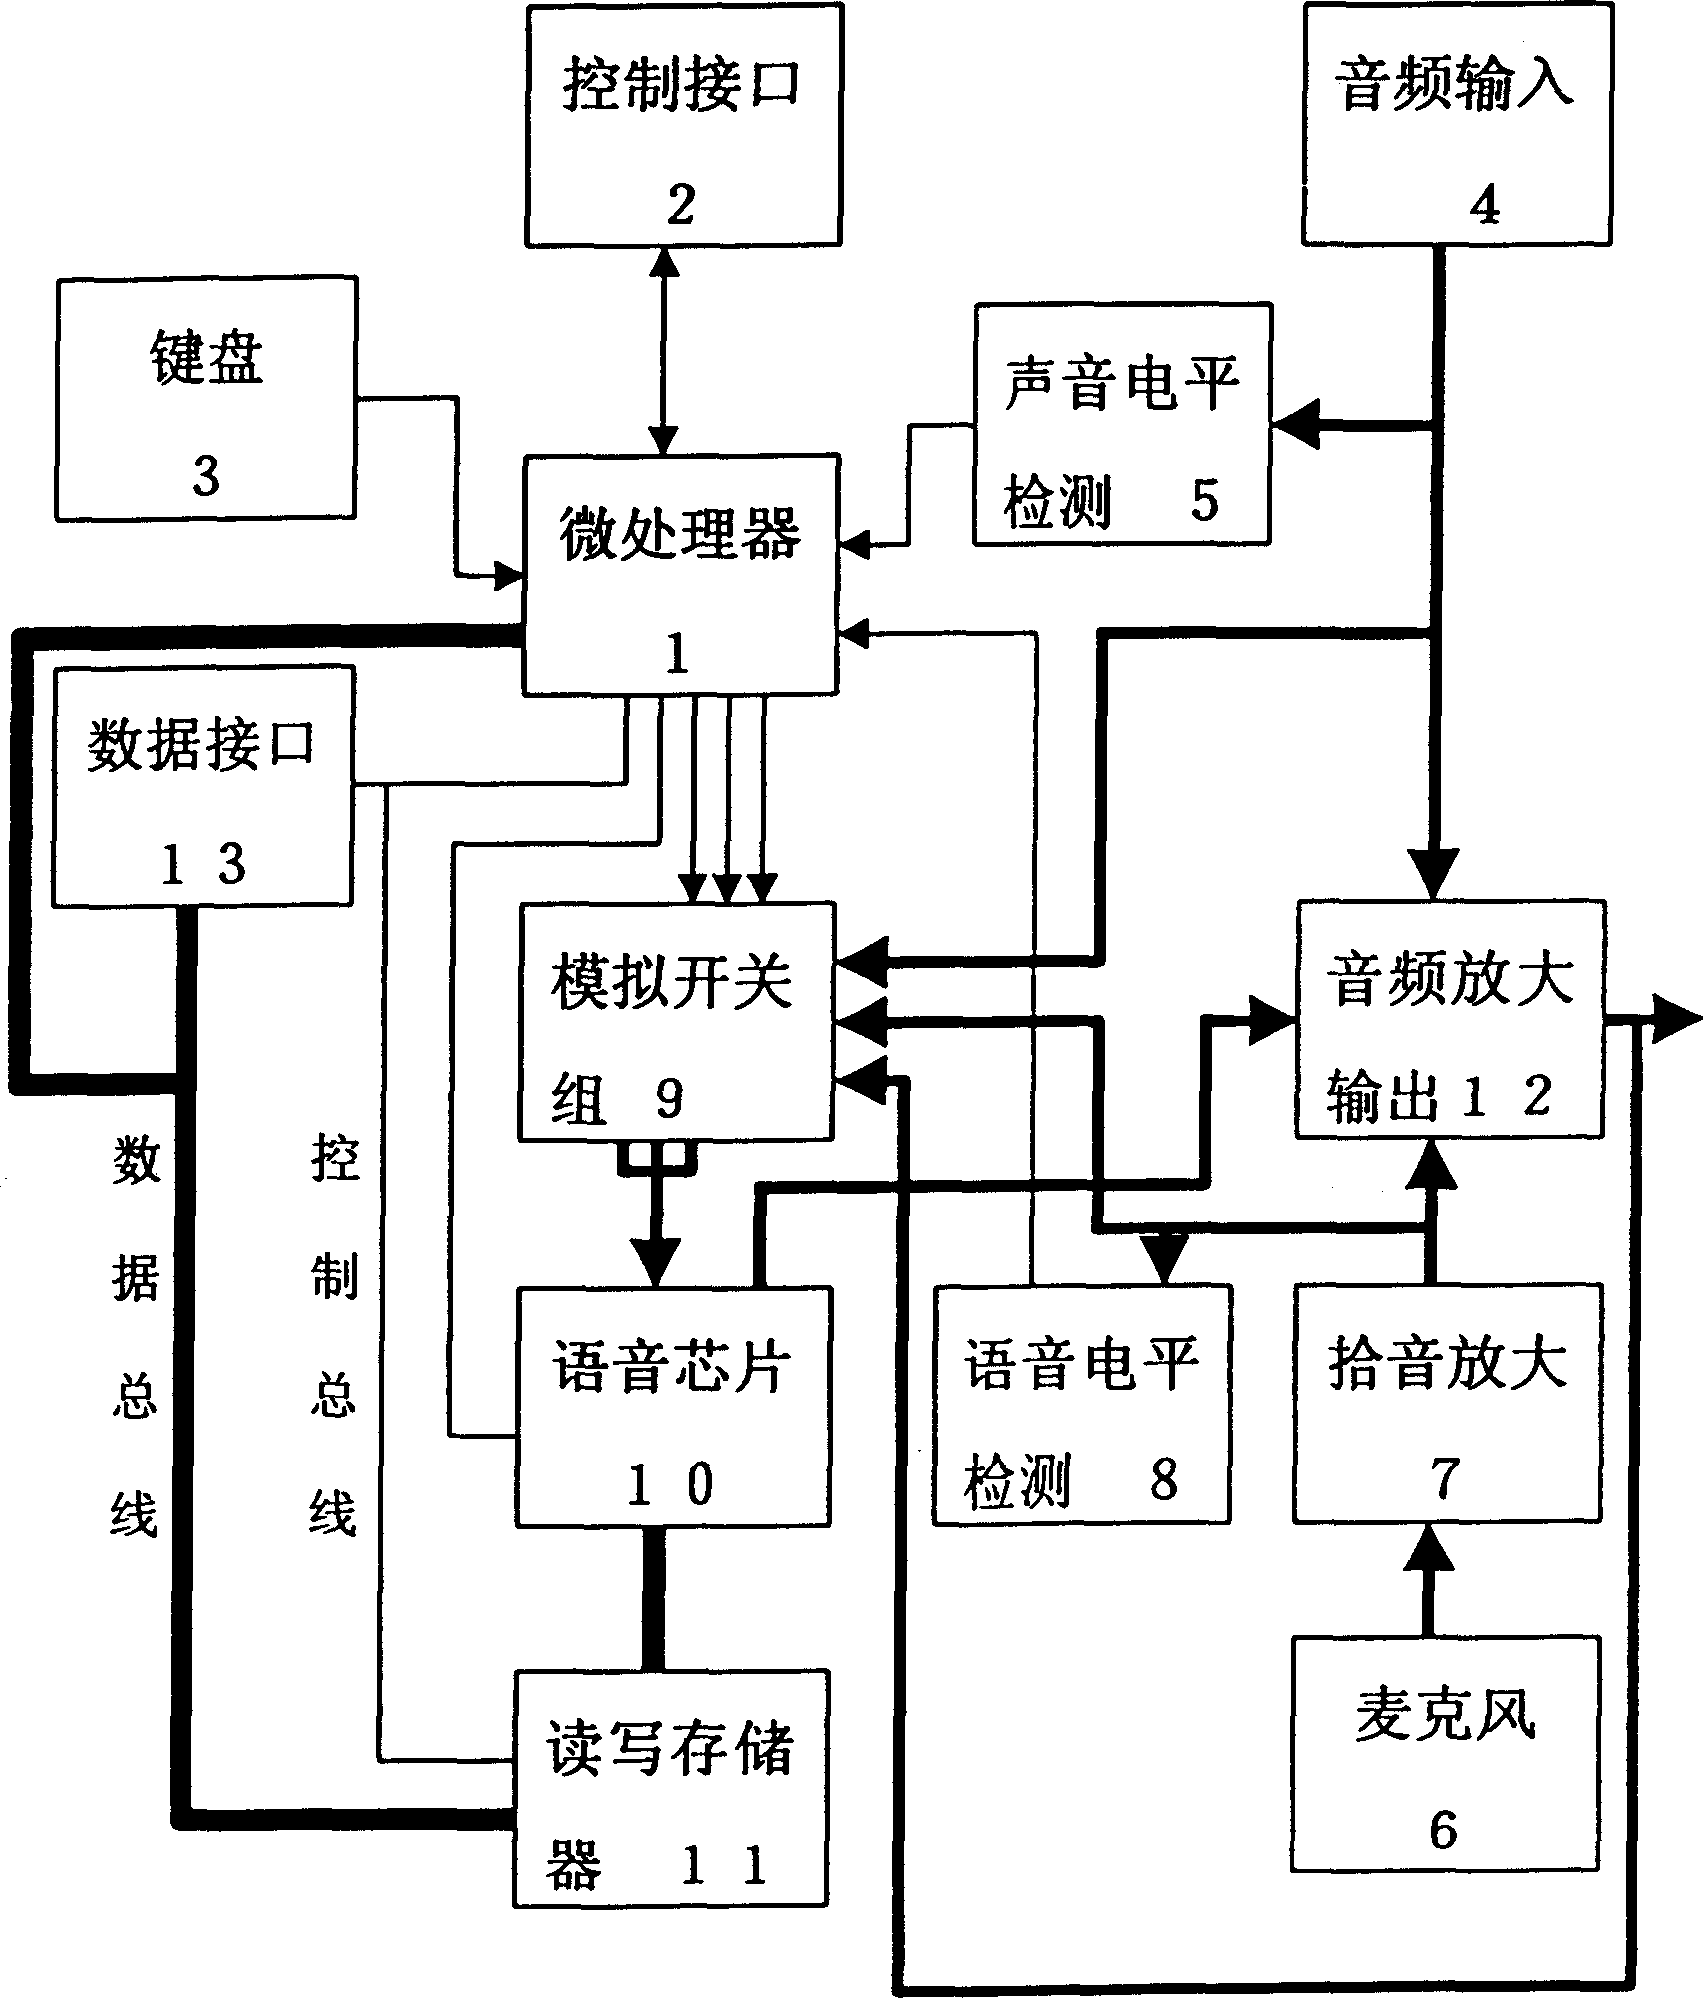 Multimedia synchronous computerized language repeater and its language repeating method